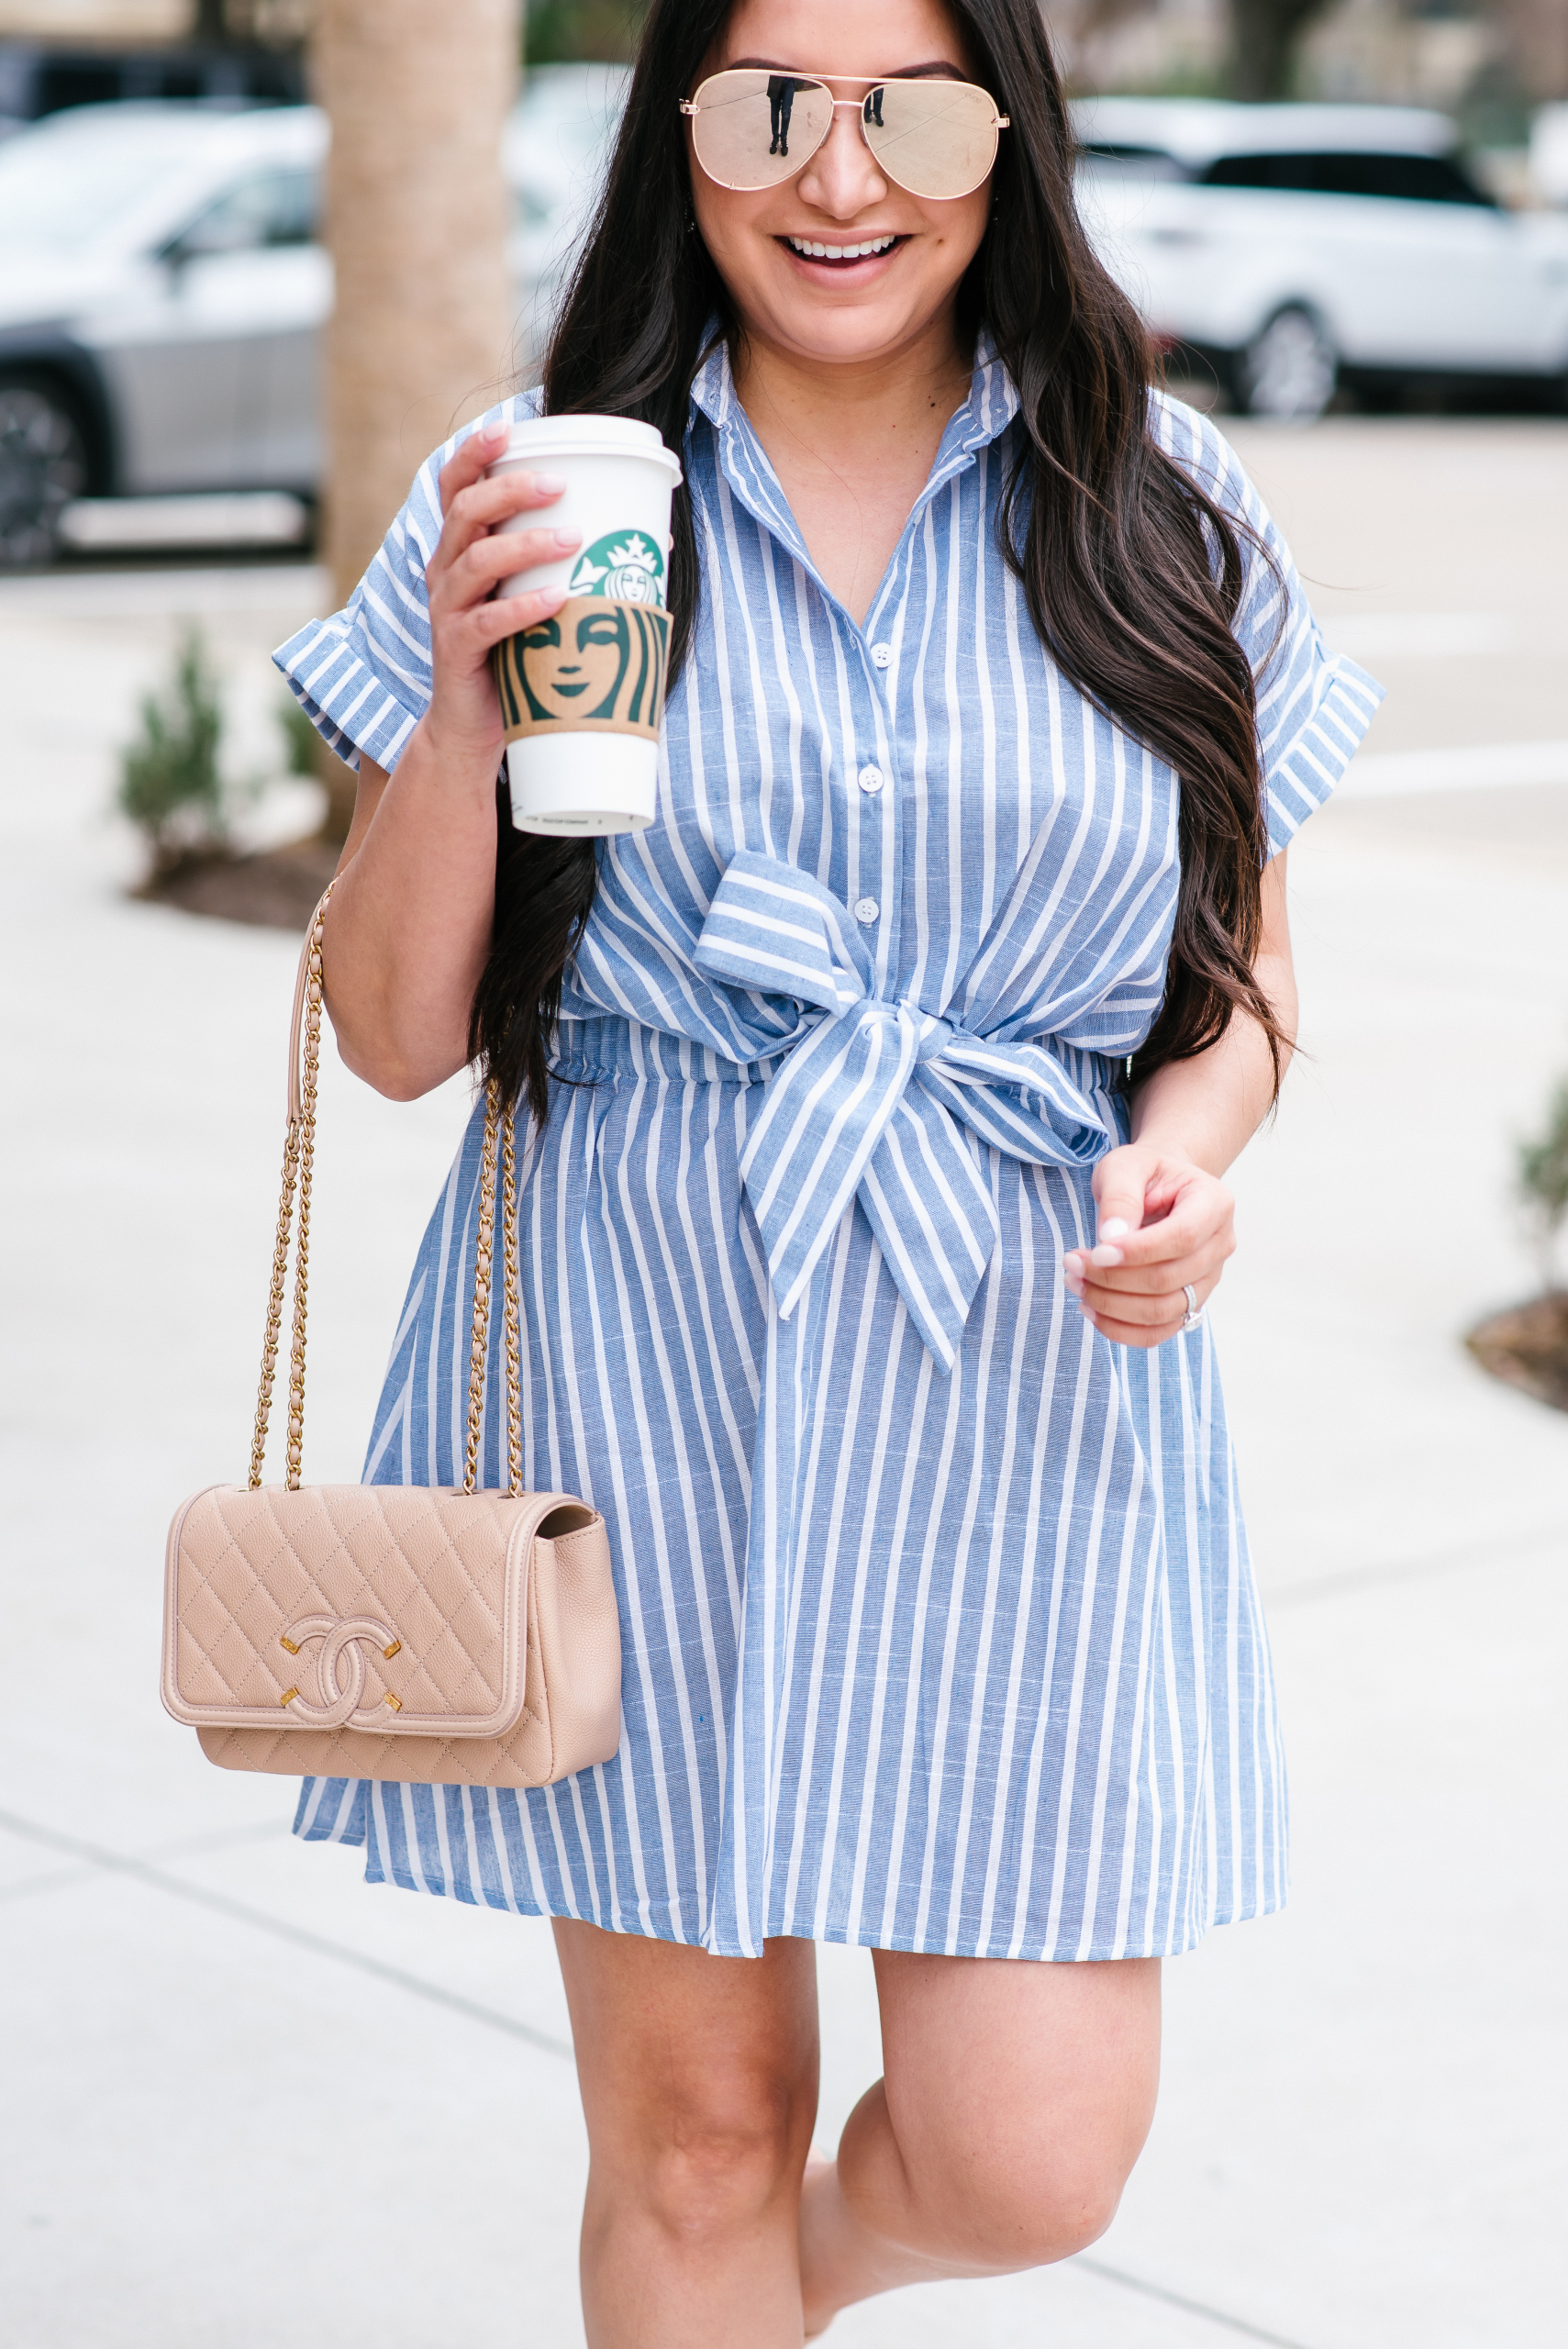 The Perfect Easter Dress, LuxMommy